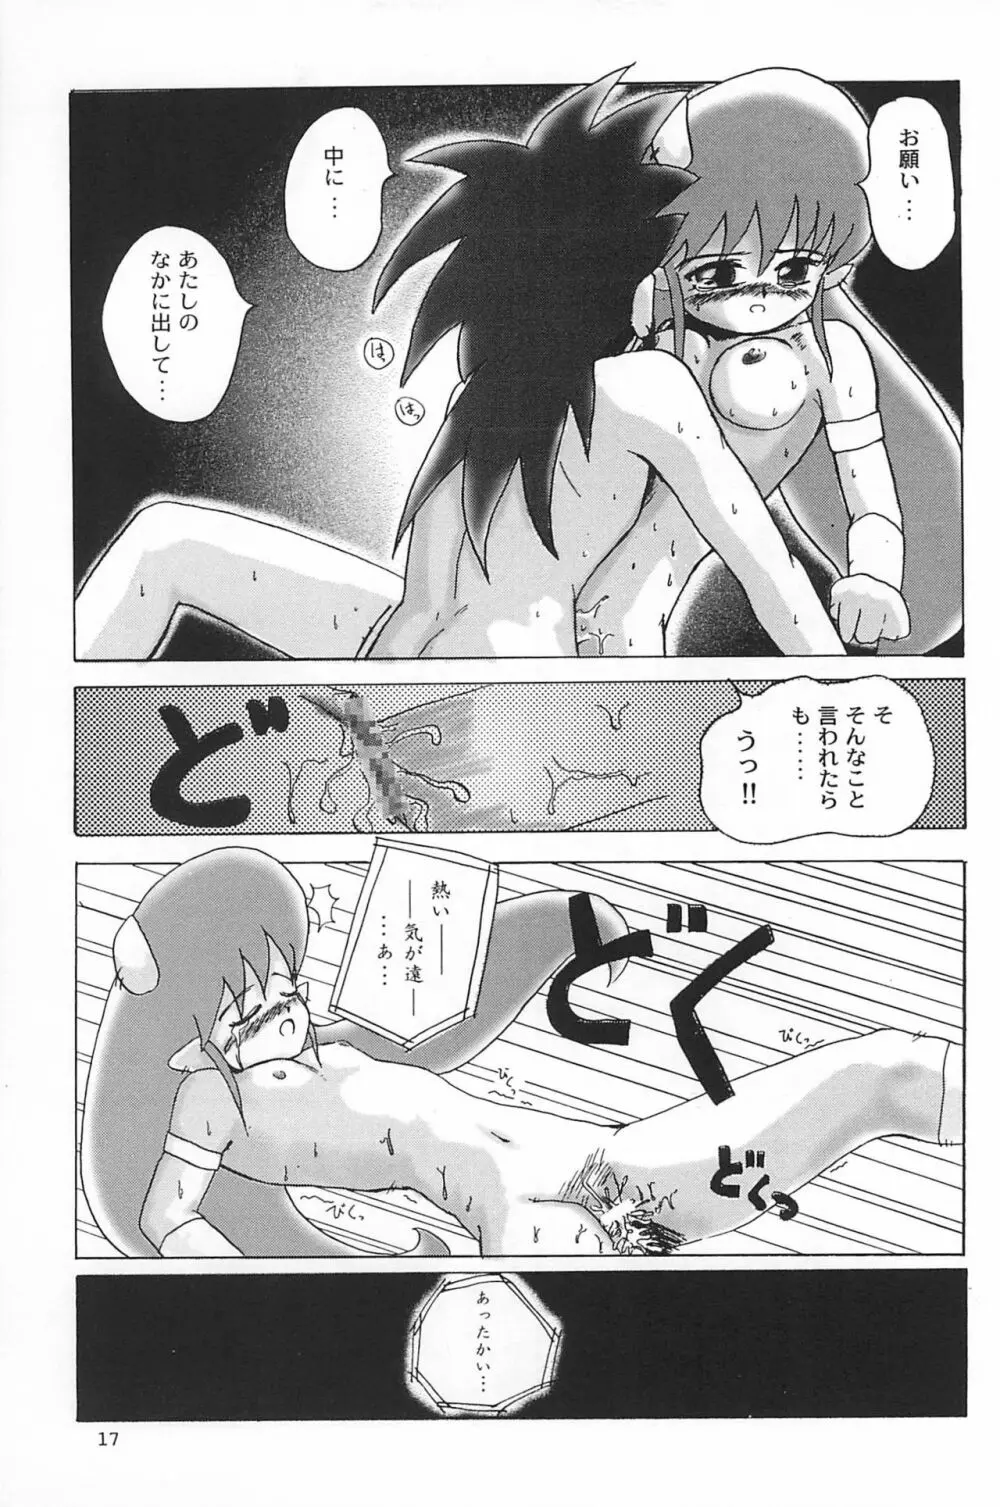 ND-special Volume 1 Page.17